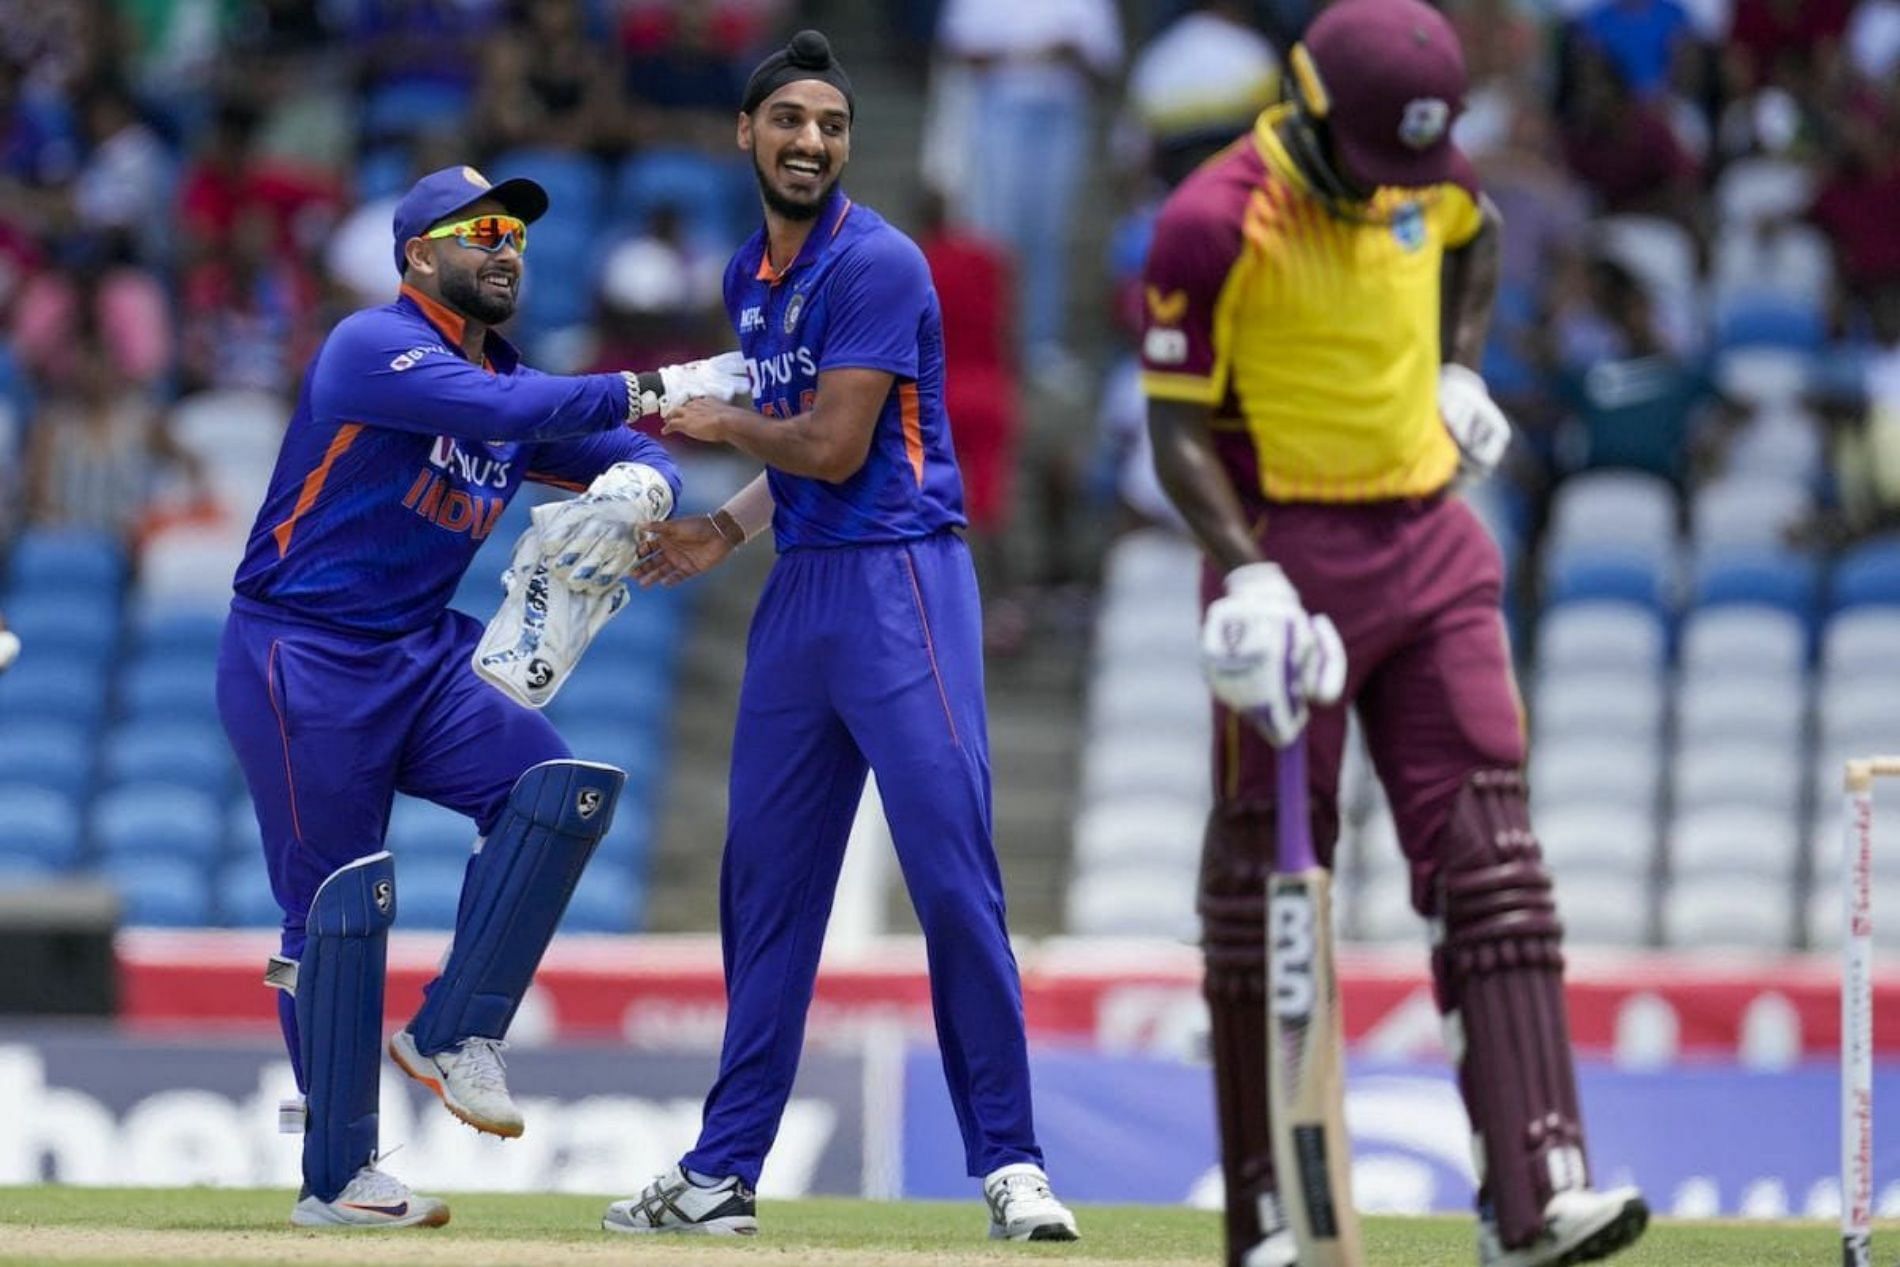 Arshdeep Singh celebrates a wicket in the first T20I against West Indies.